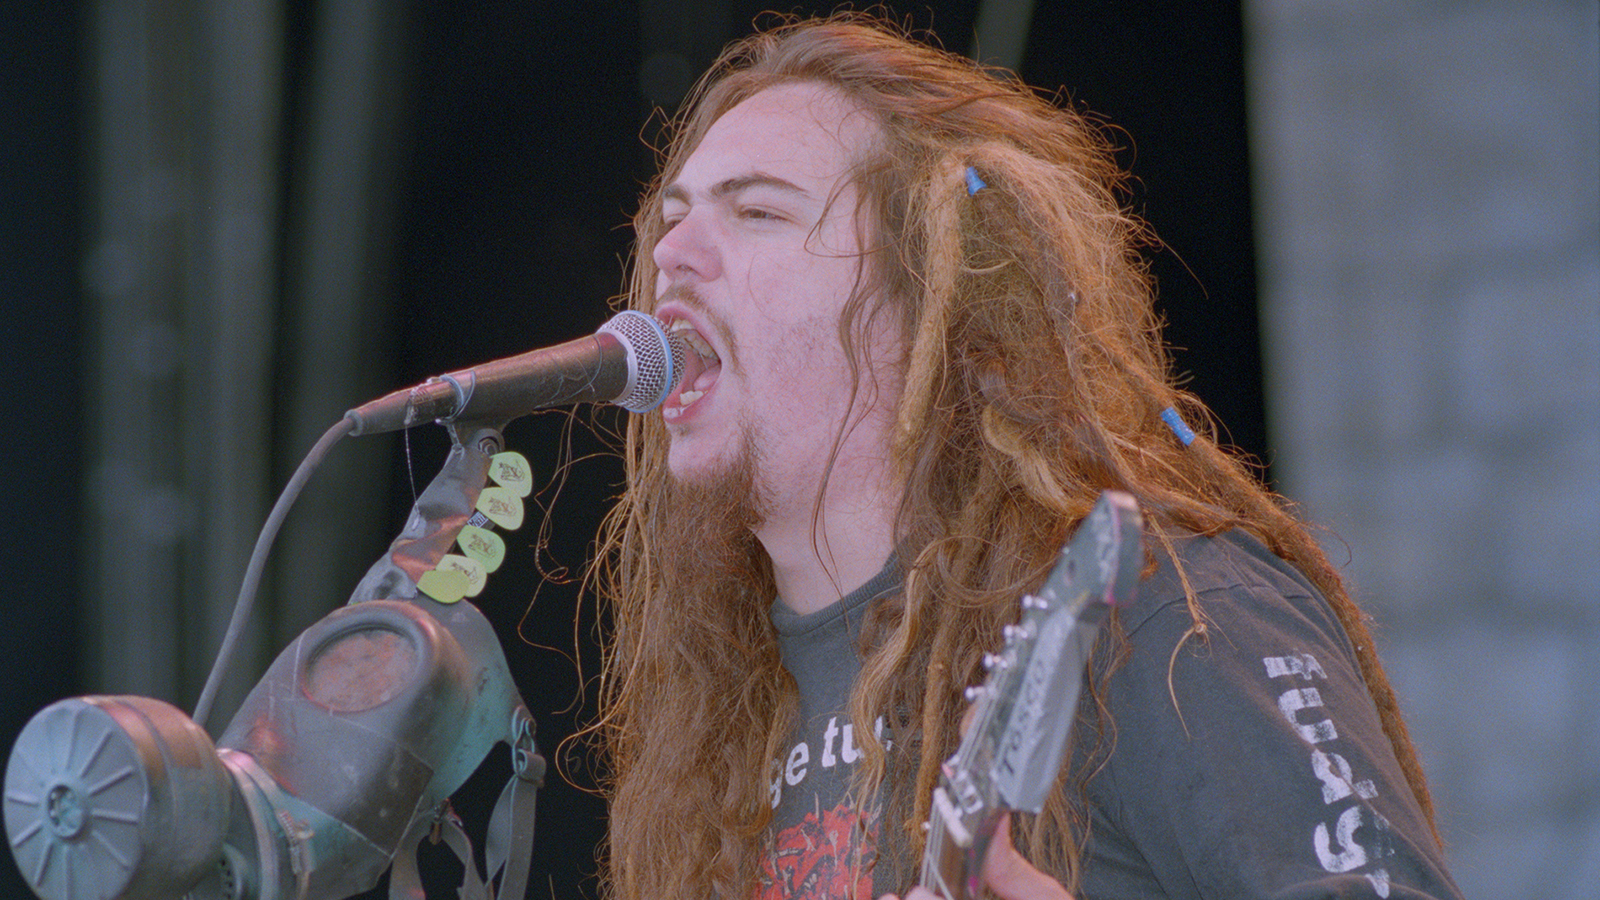 Why Did Max Cavalera Leave Sepultura in the '90s?